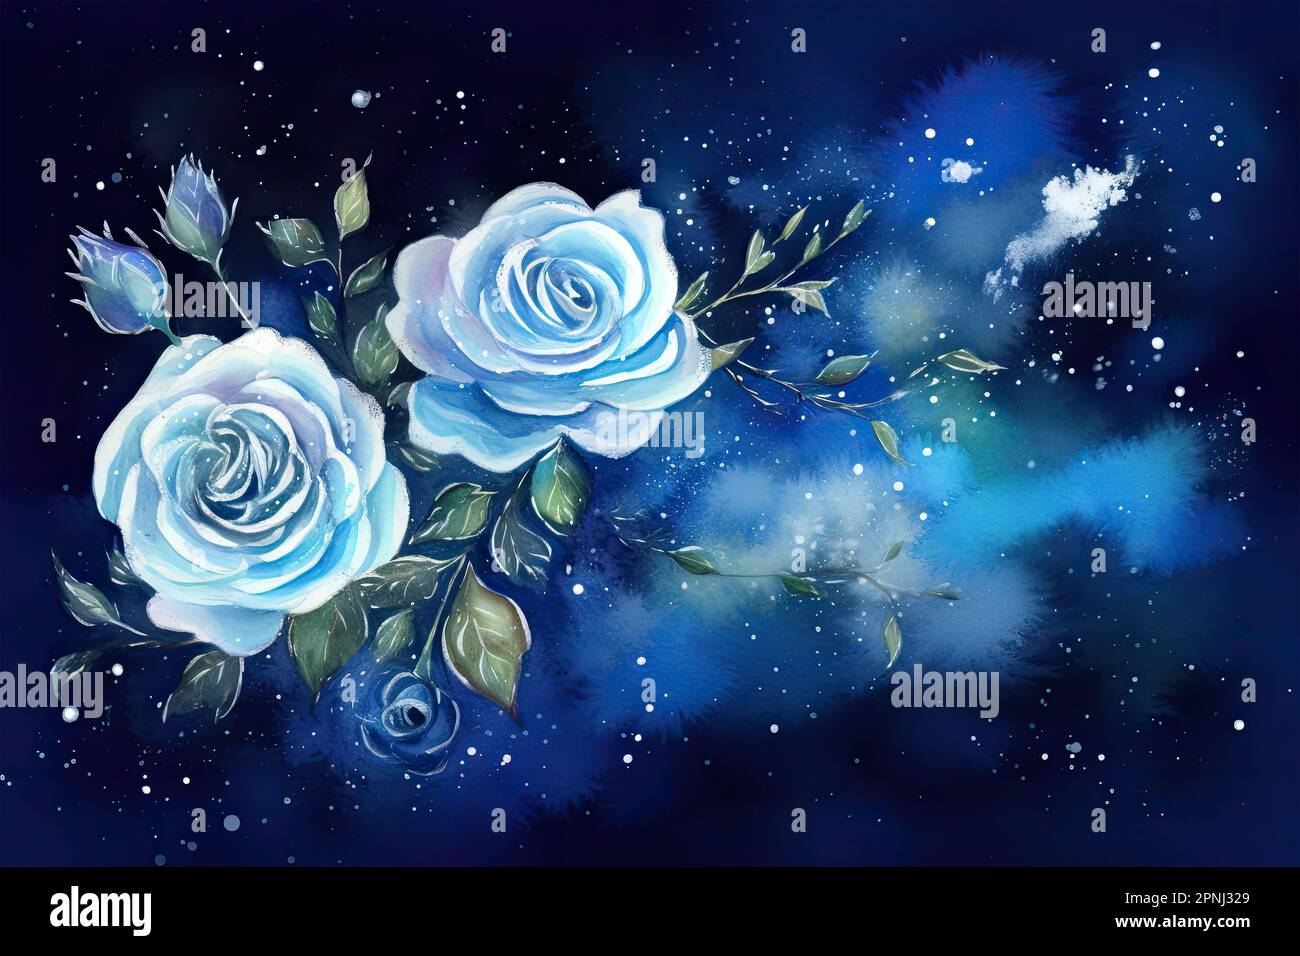 Use watercolors to create a delicate and intricate scene of blue roses with  fine details and soft textures, against a deep blue background Stock Photo  - Alamy